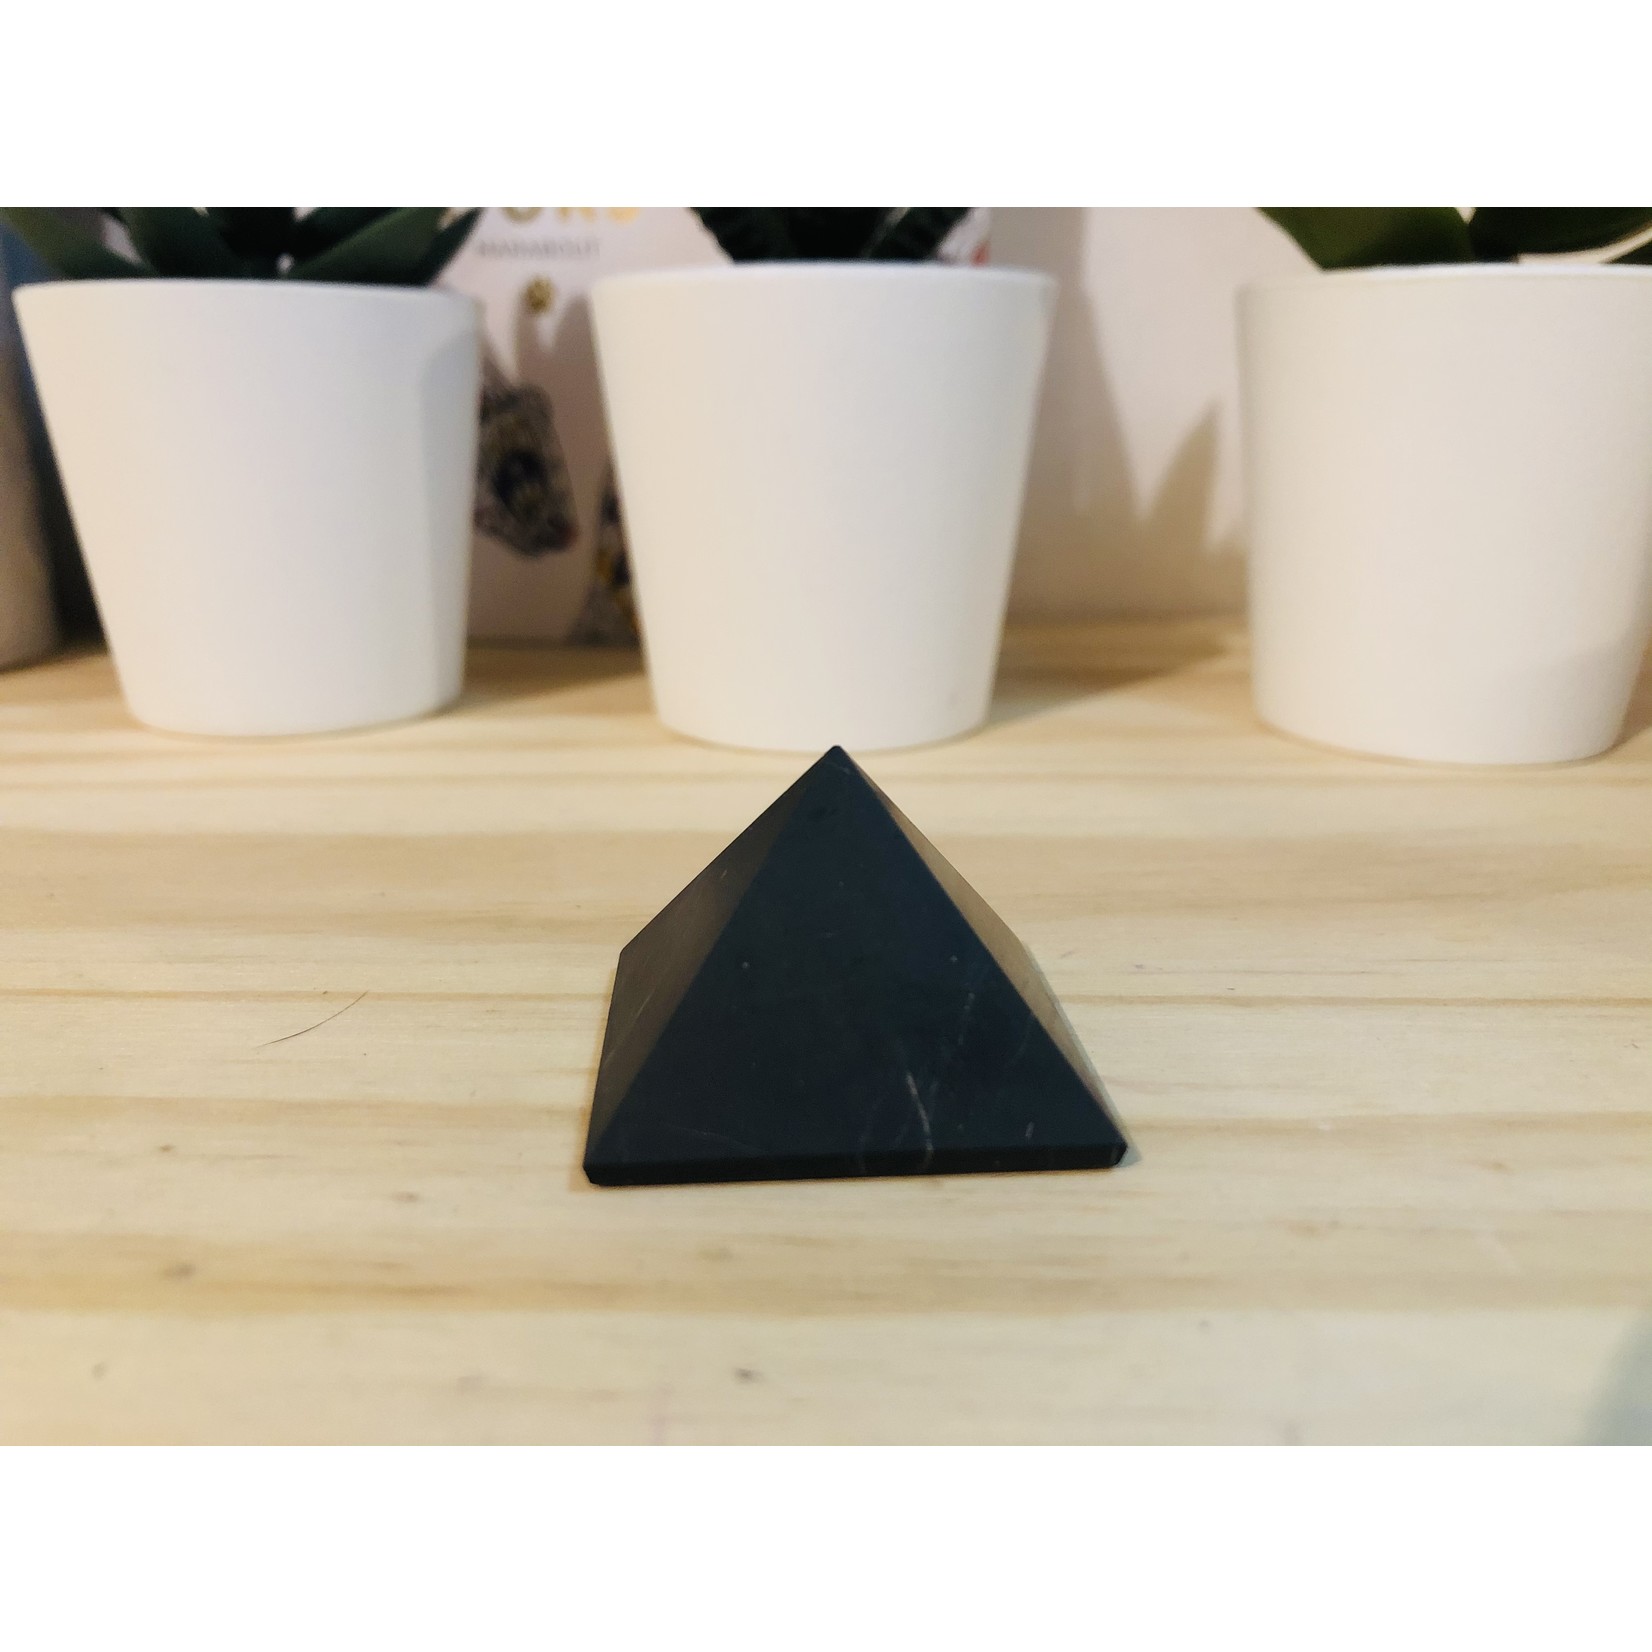 Elite Russian Shungite Pyramid, 30mm - Unpolished, Natural Black Stone for EMF Protection and Energetic Harmony